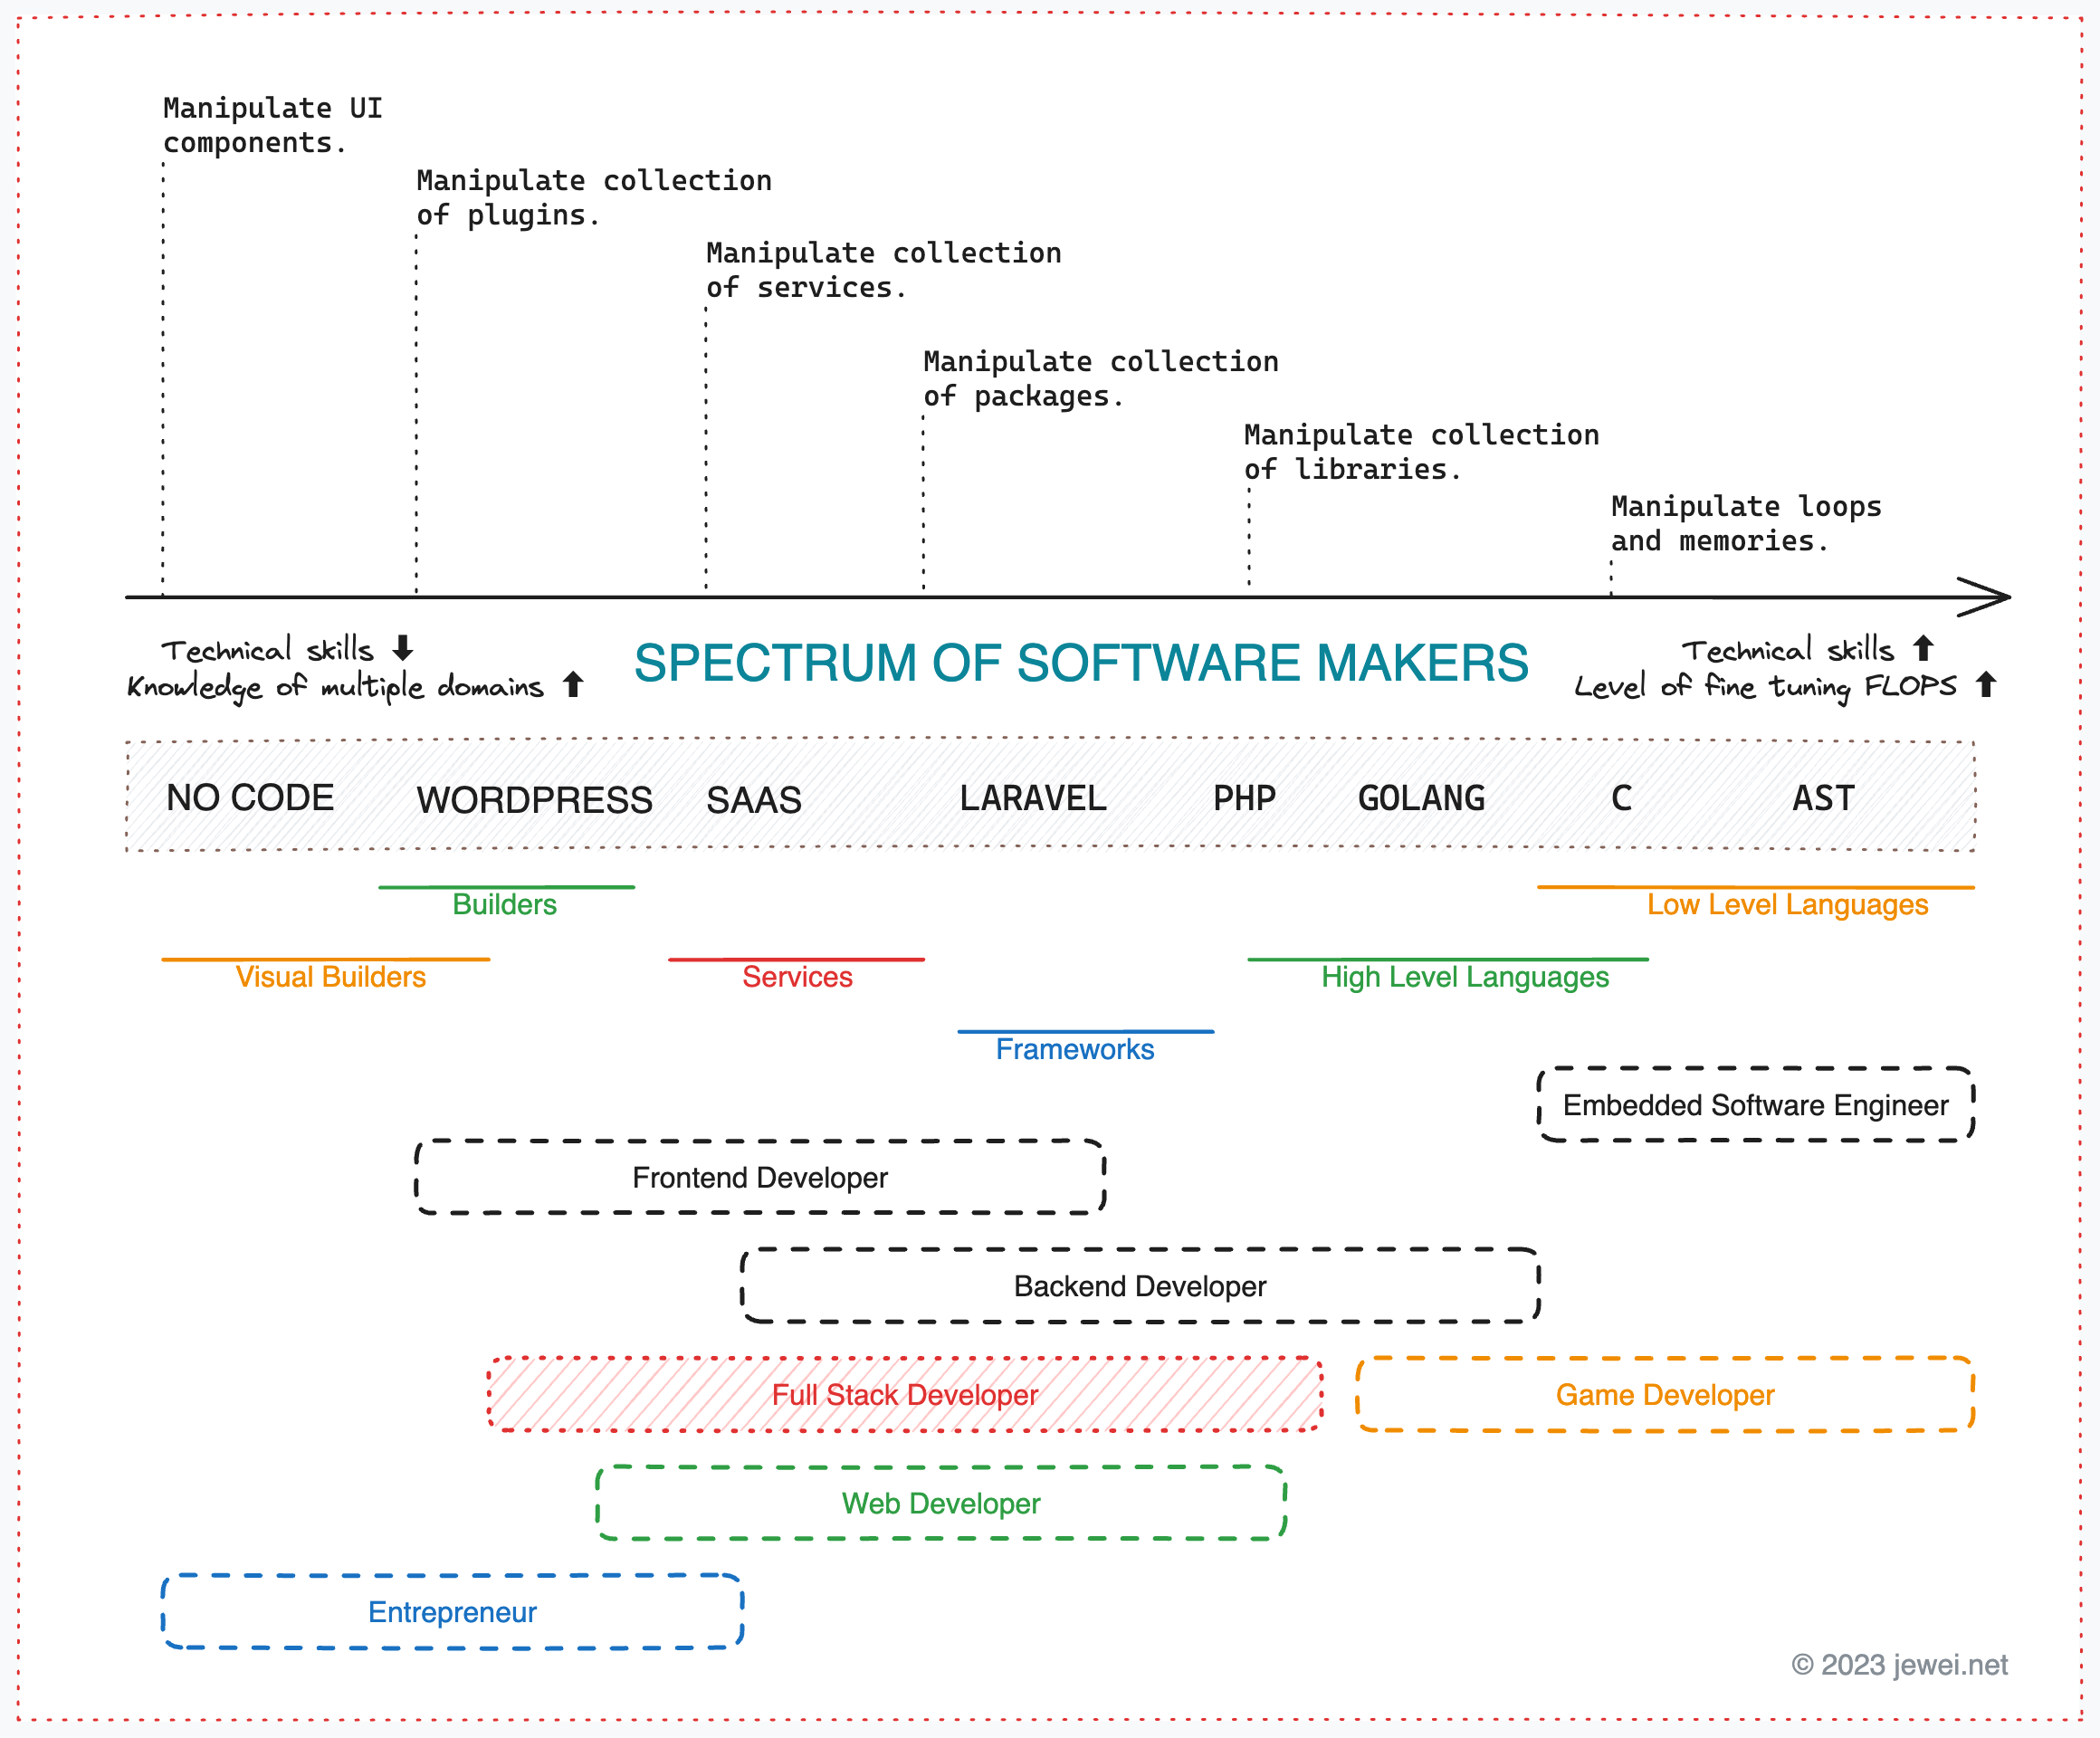 The Spectrum of Software Makers